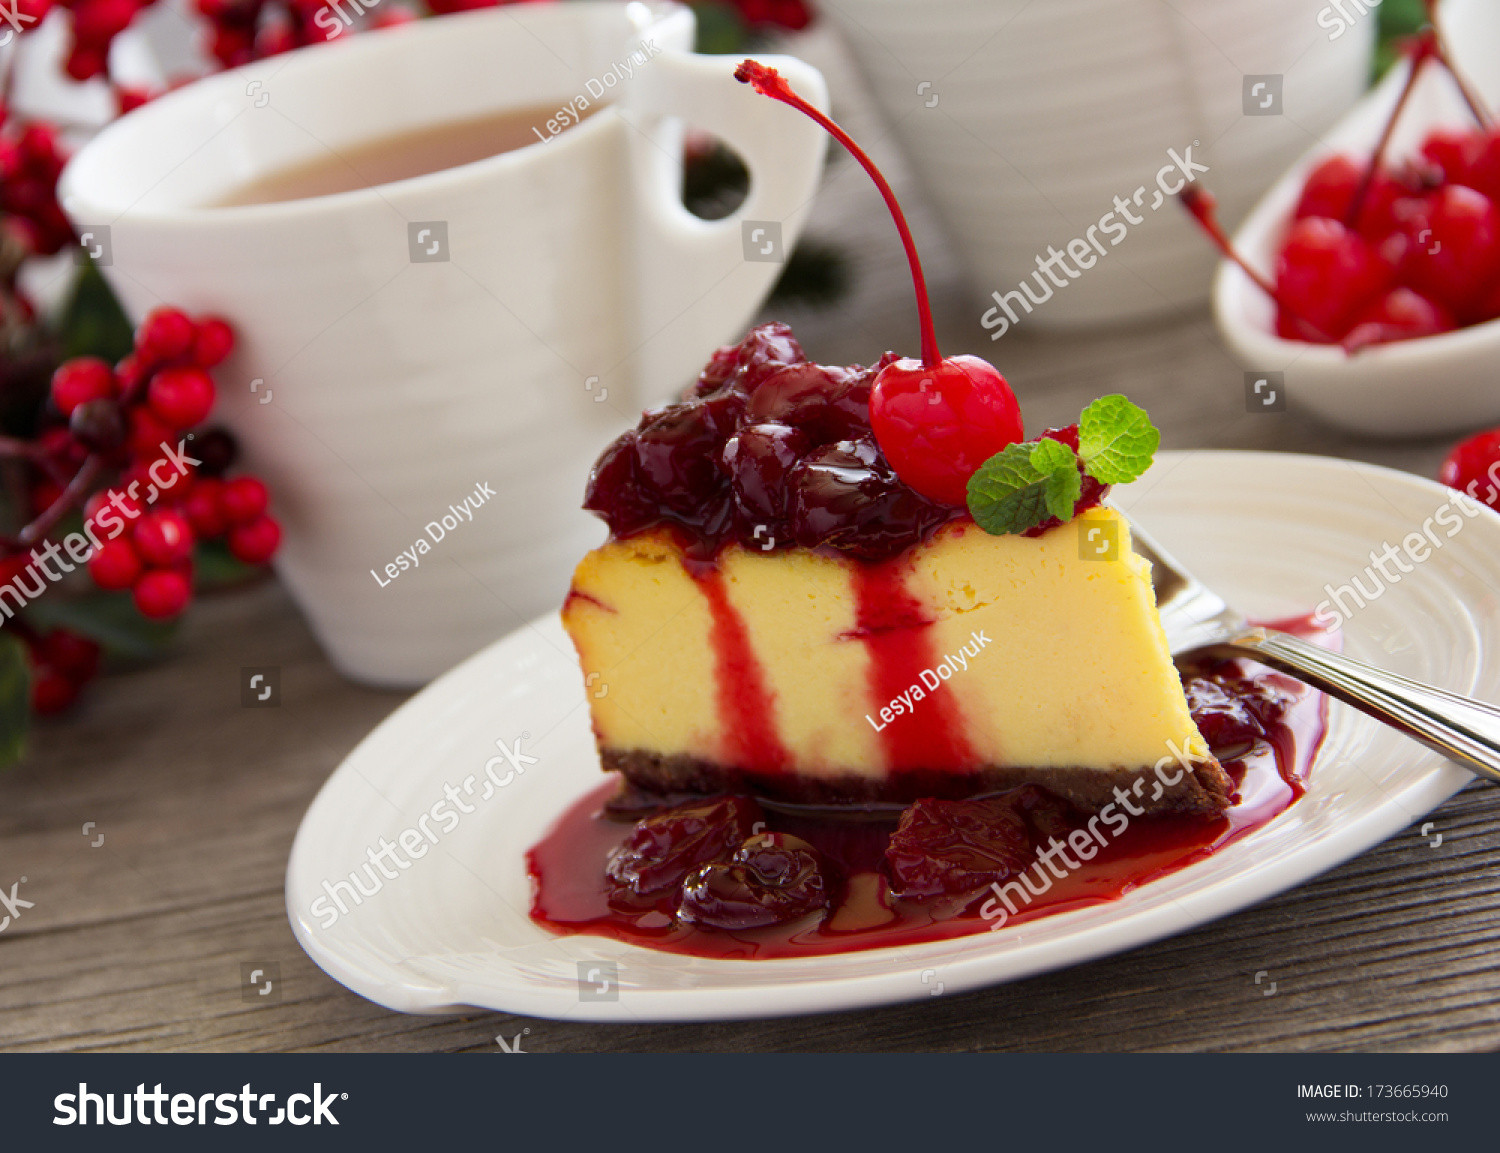 Cherry Sauce For Cheese Cake
 A Slice Cheesecake With Cherry Sauce Stock